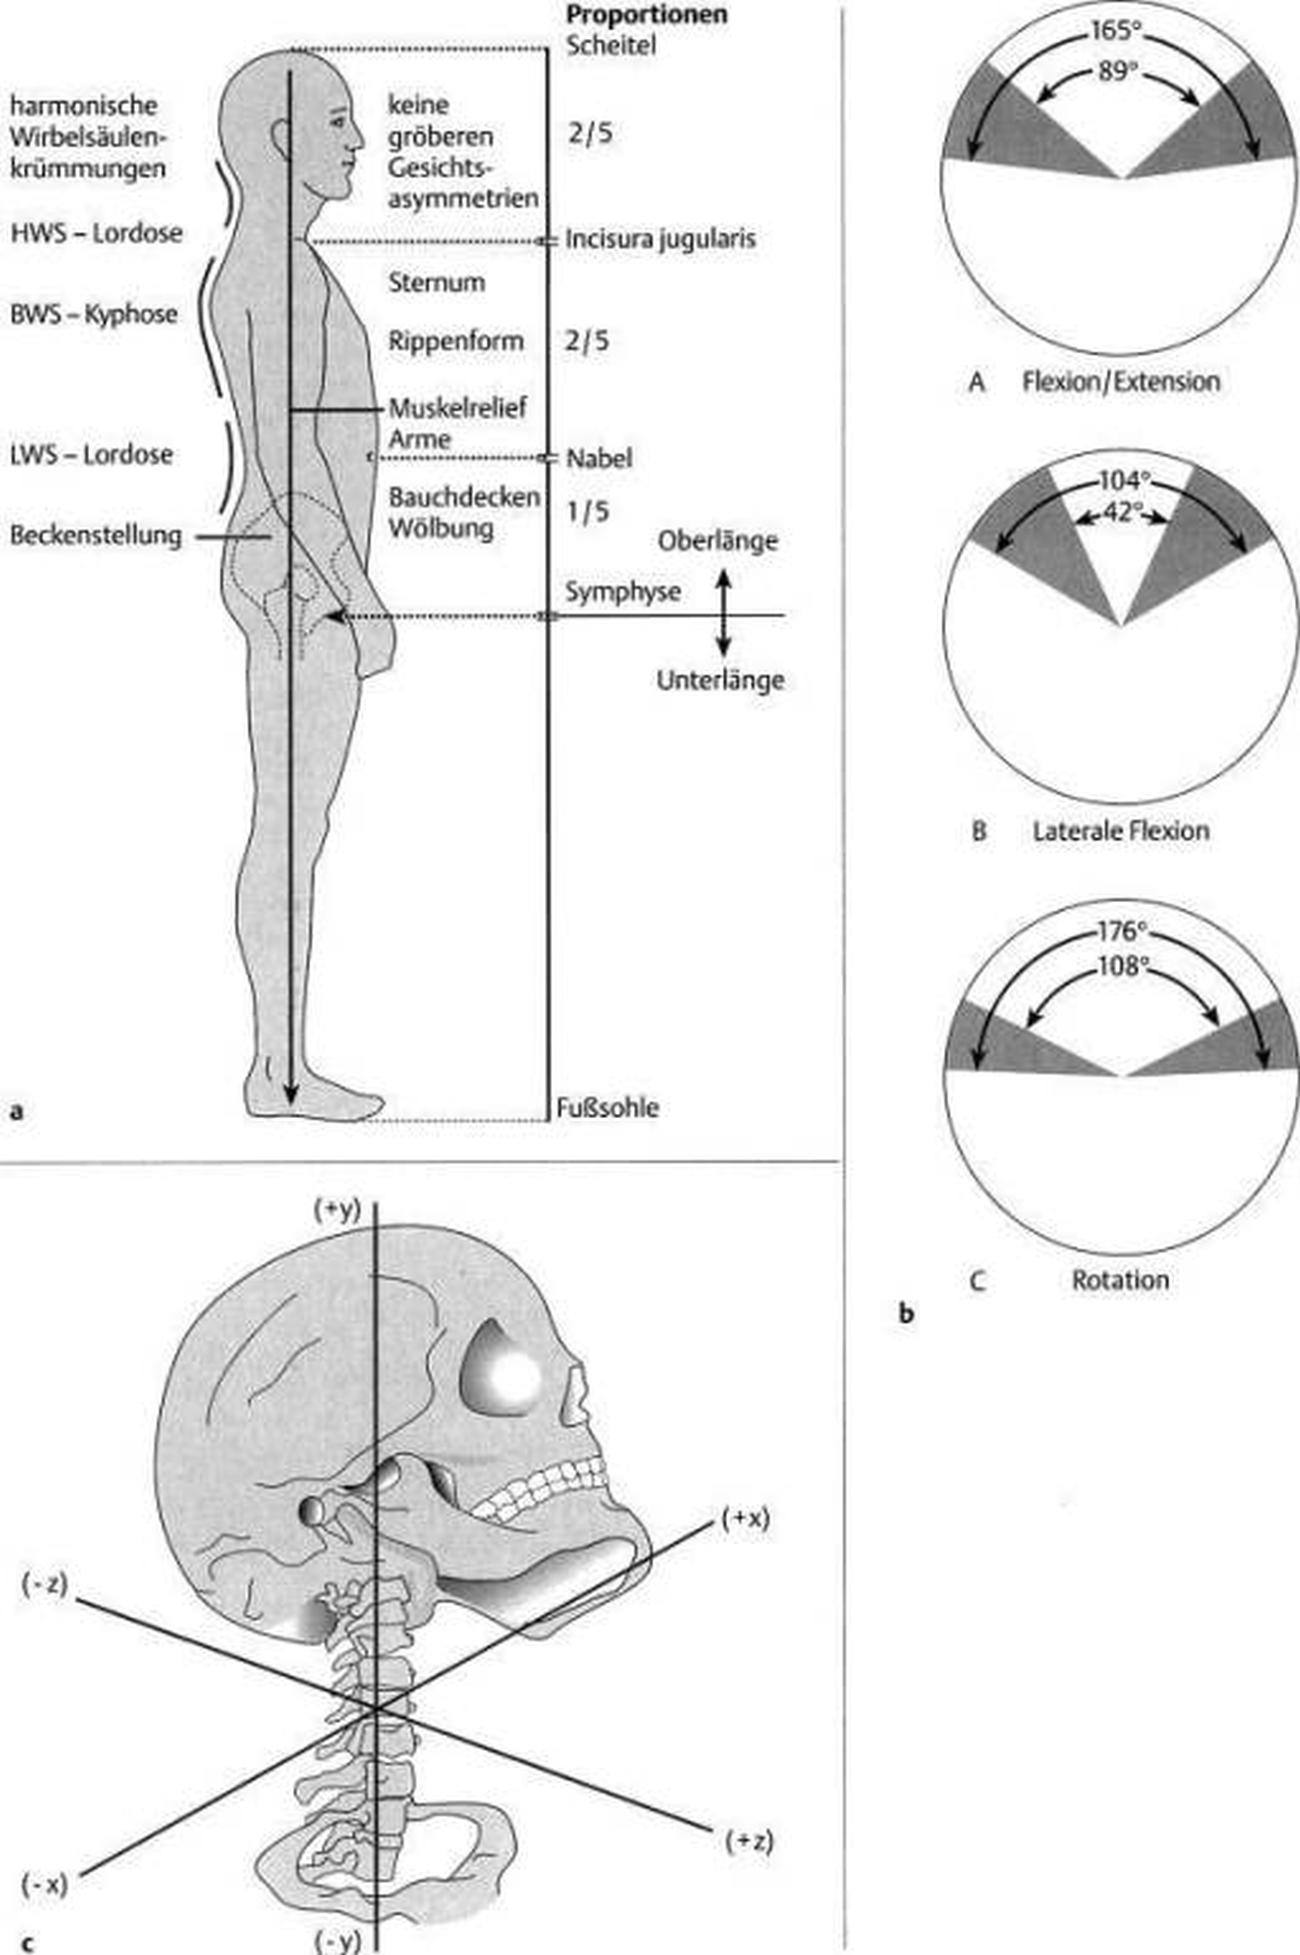 Pictures Of Cervical Spine, Movements